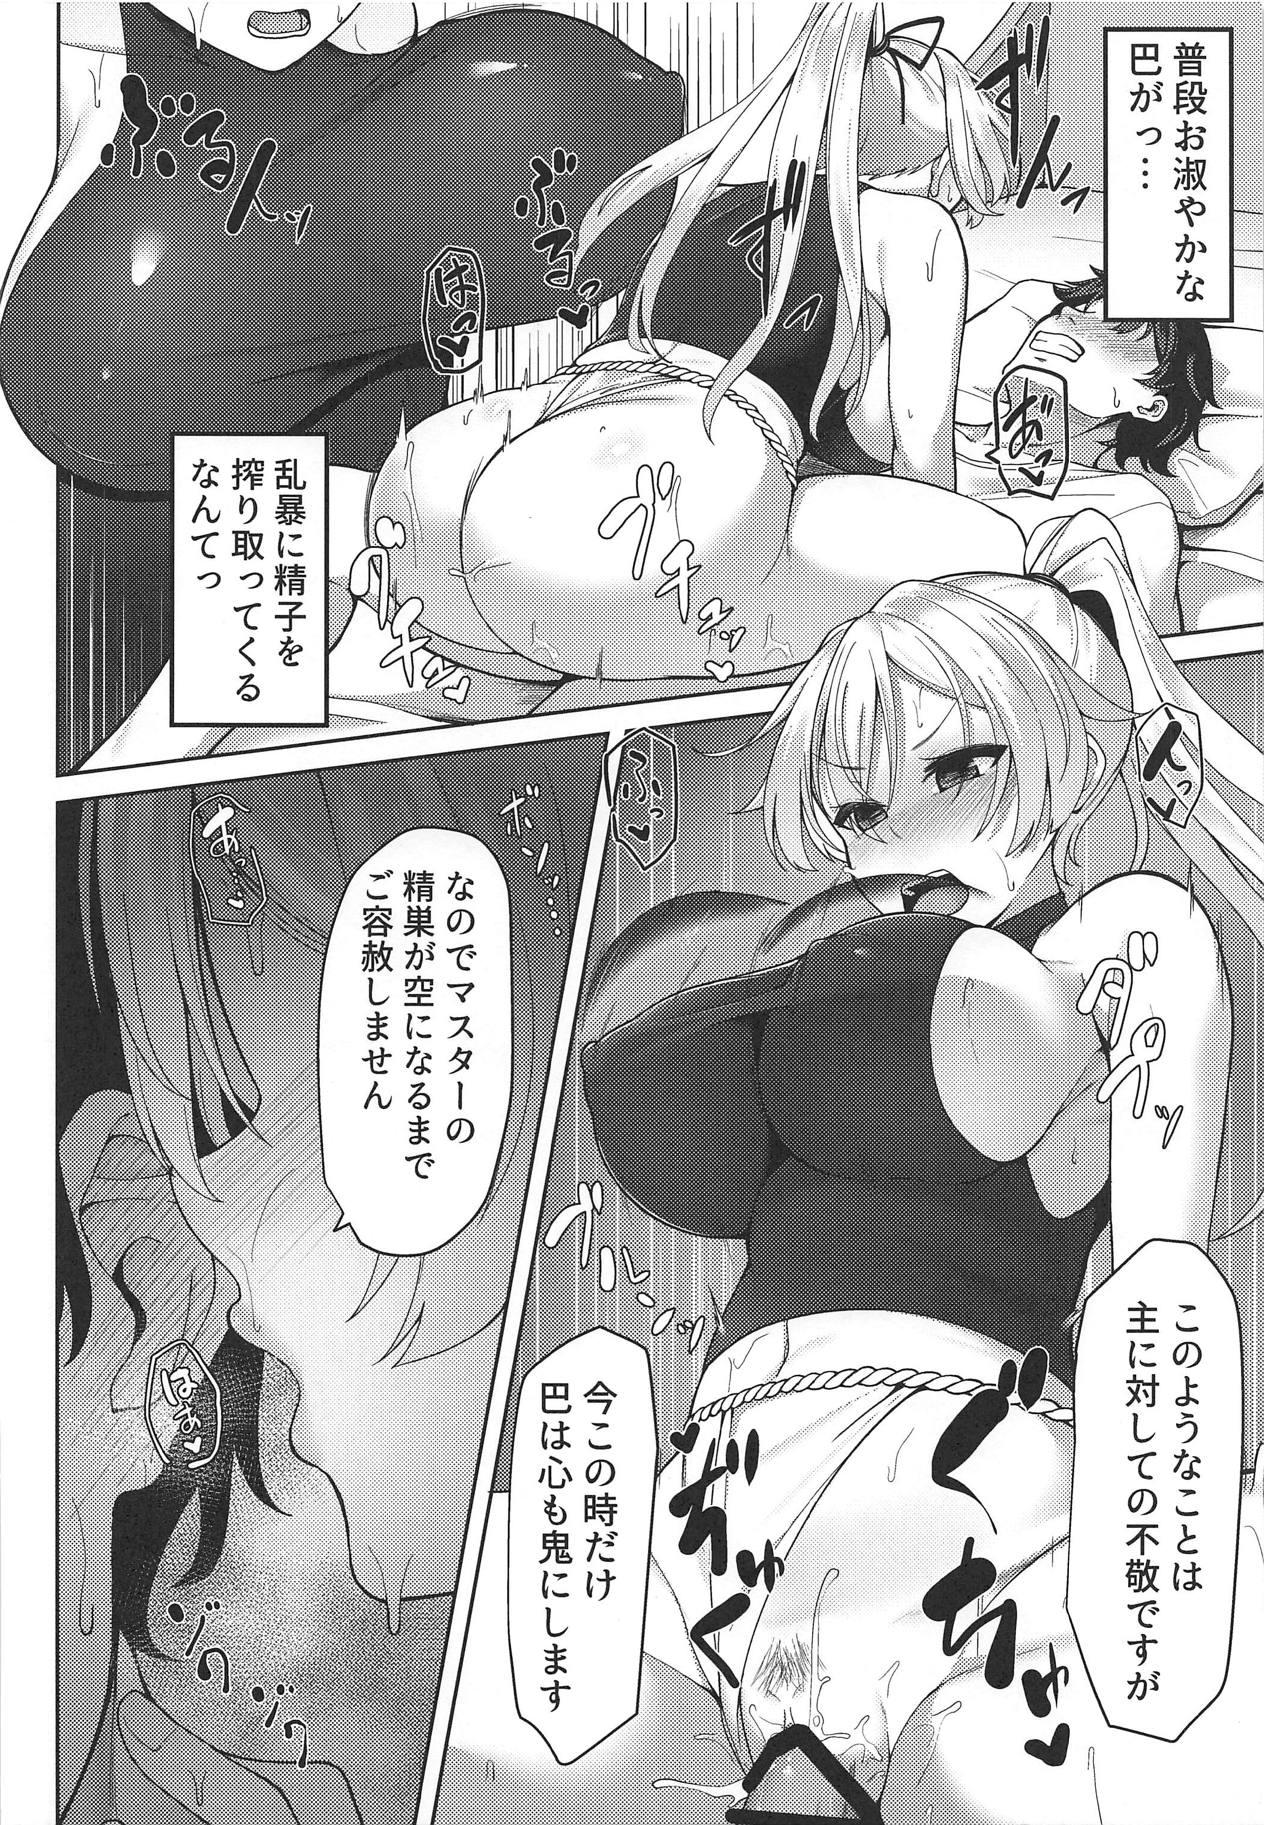 Bdsm ☆☆☆☆☆☆☆☆Sand - Fate grand order Gangbang - Page 9